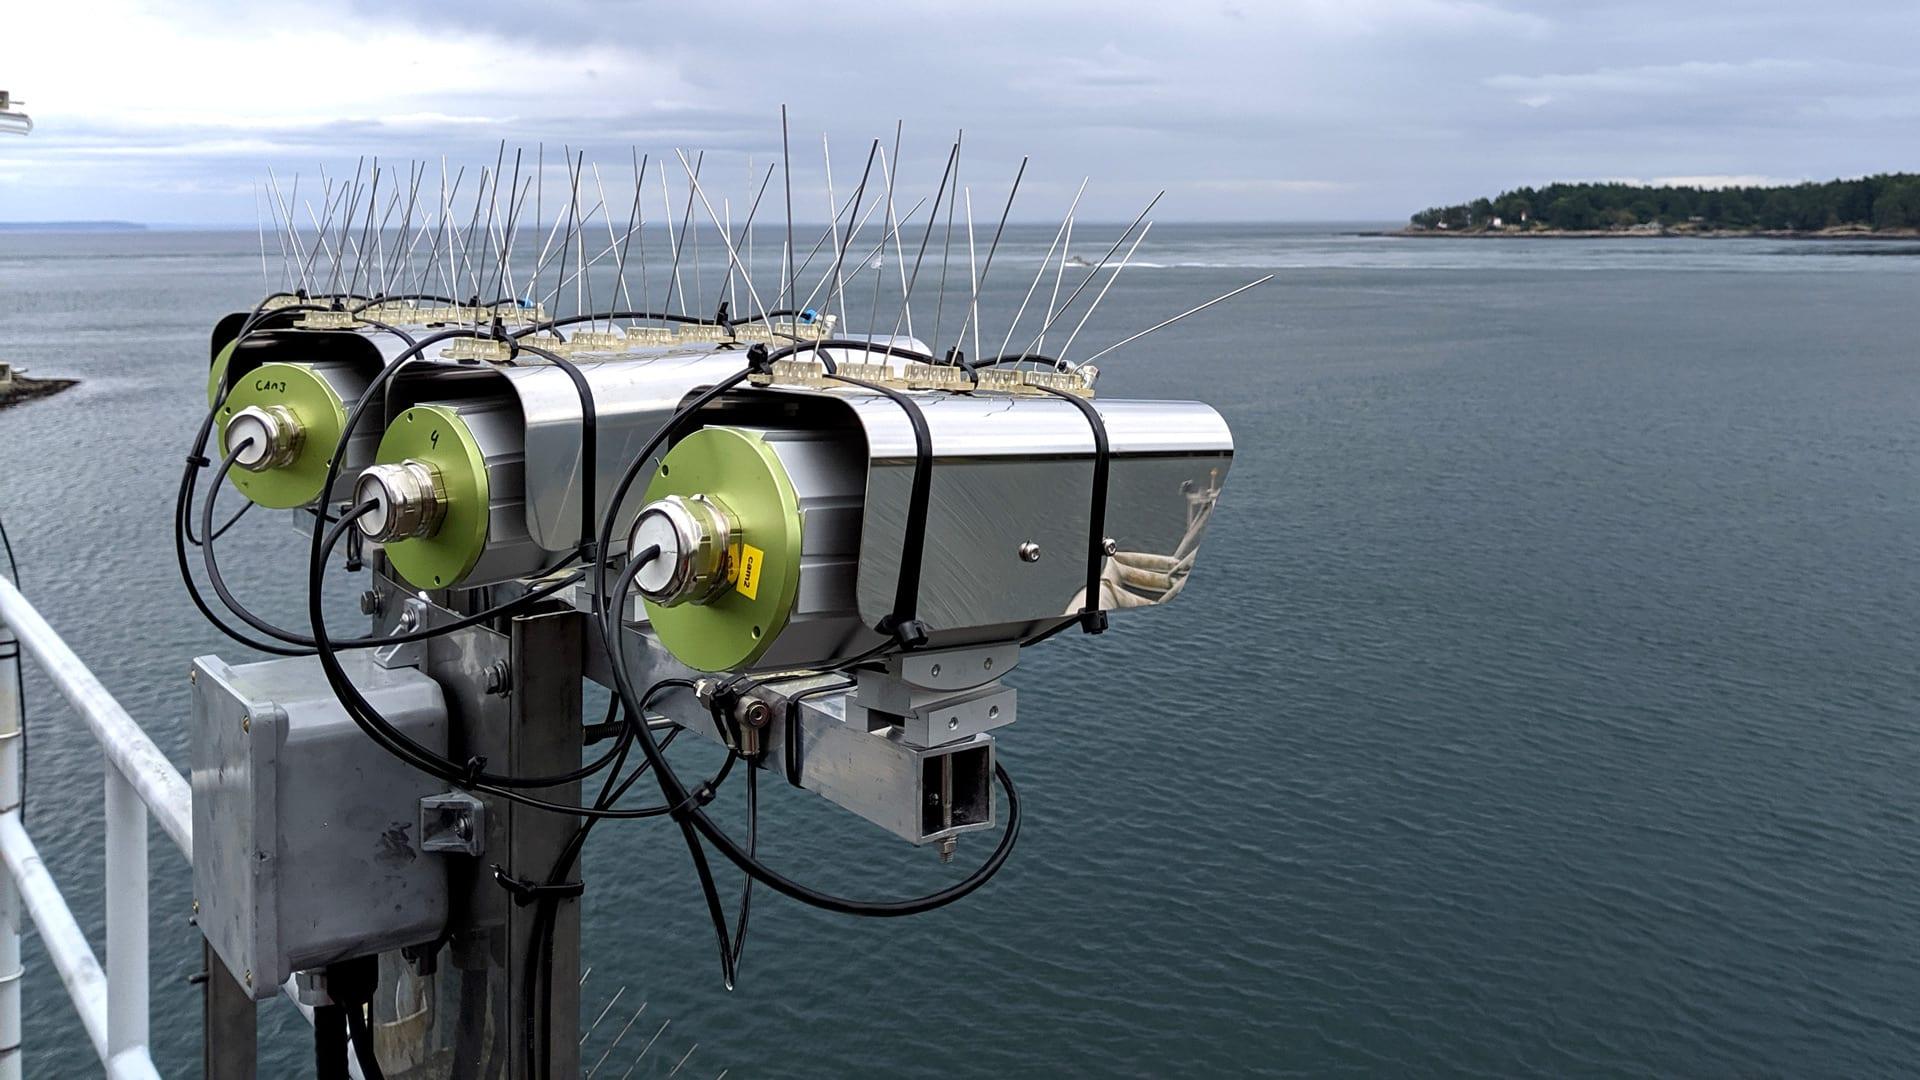 em1 Thermal IR cameras in BC for whale detection